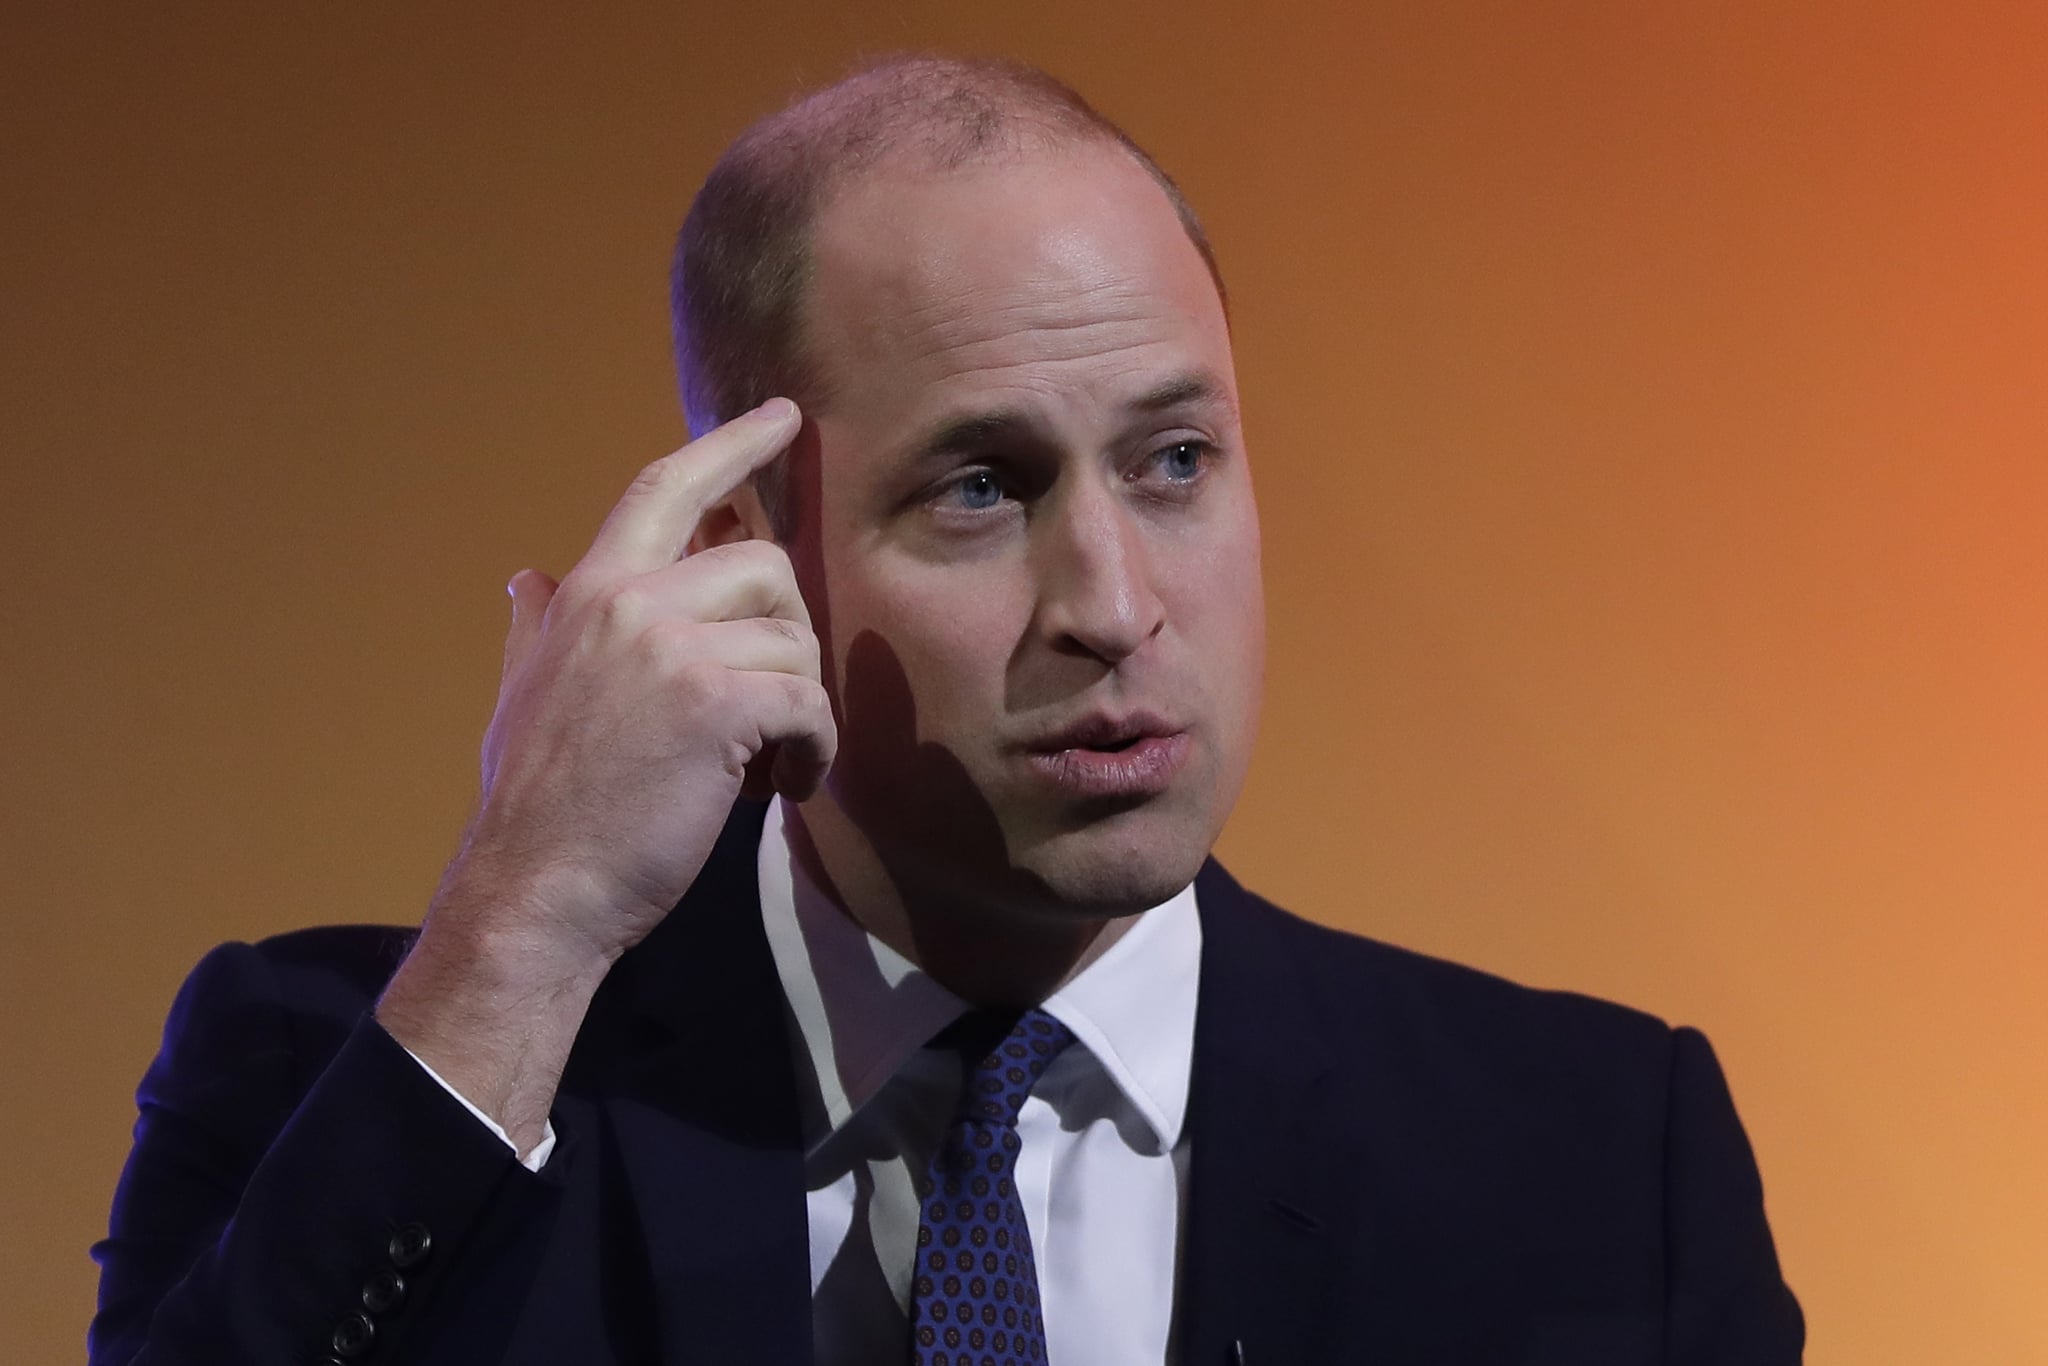 LONDON, ENGLAND - NOVEMBER 20: Prince William, Duke of Cambridge speaks on stage during a panel discussion at the inaugural 'This Can Happen' conference on November 20, 2018 in London, England. The conference brings together hundreds of delegates from the UK and further afield to share best practice in multiple different mental health fields. (Photo by Kirsty Wigglesworth - WPA Pool/Getty Images)